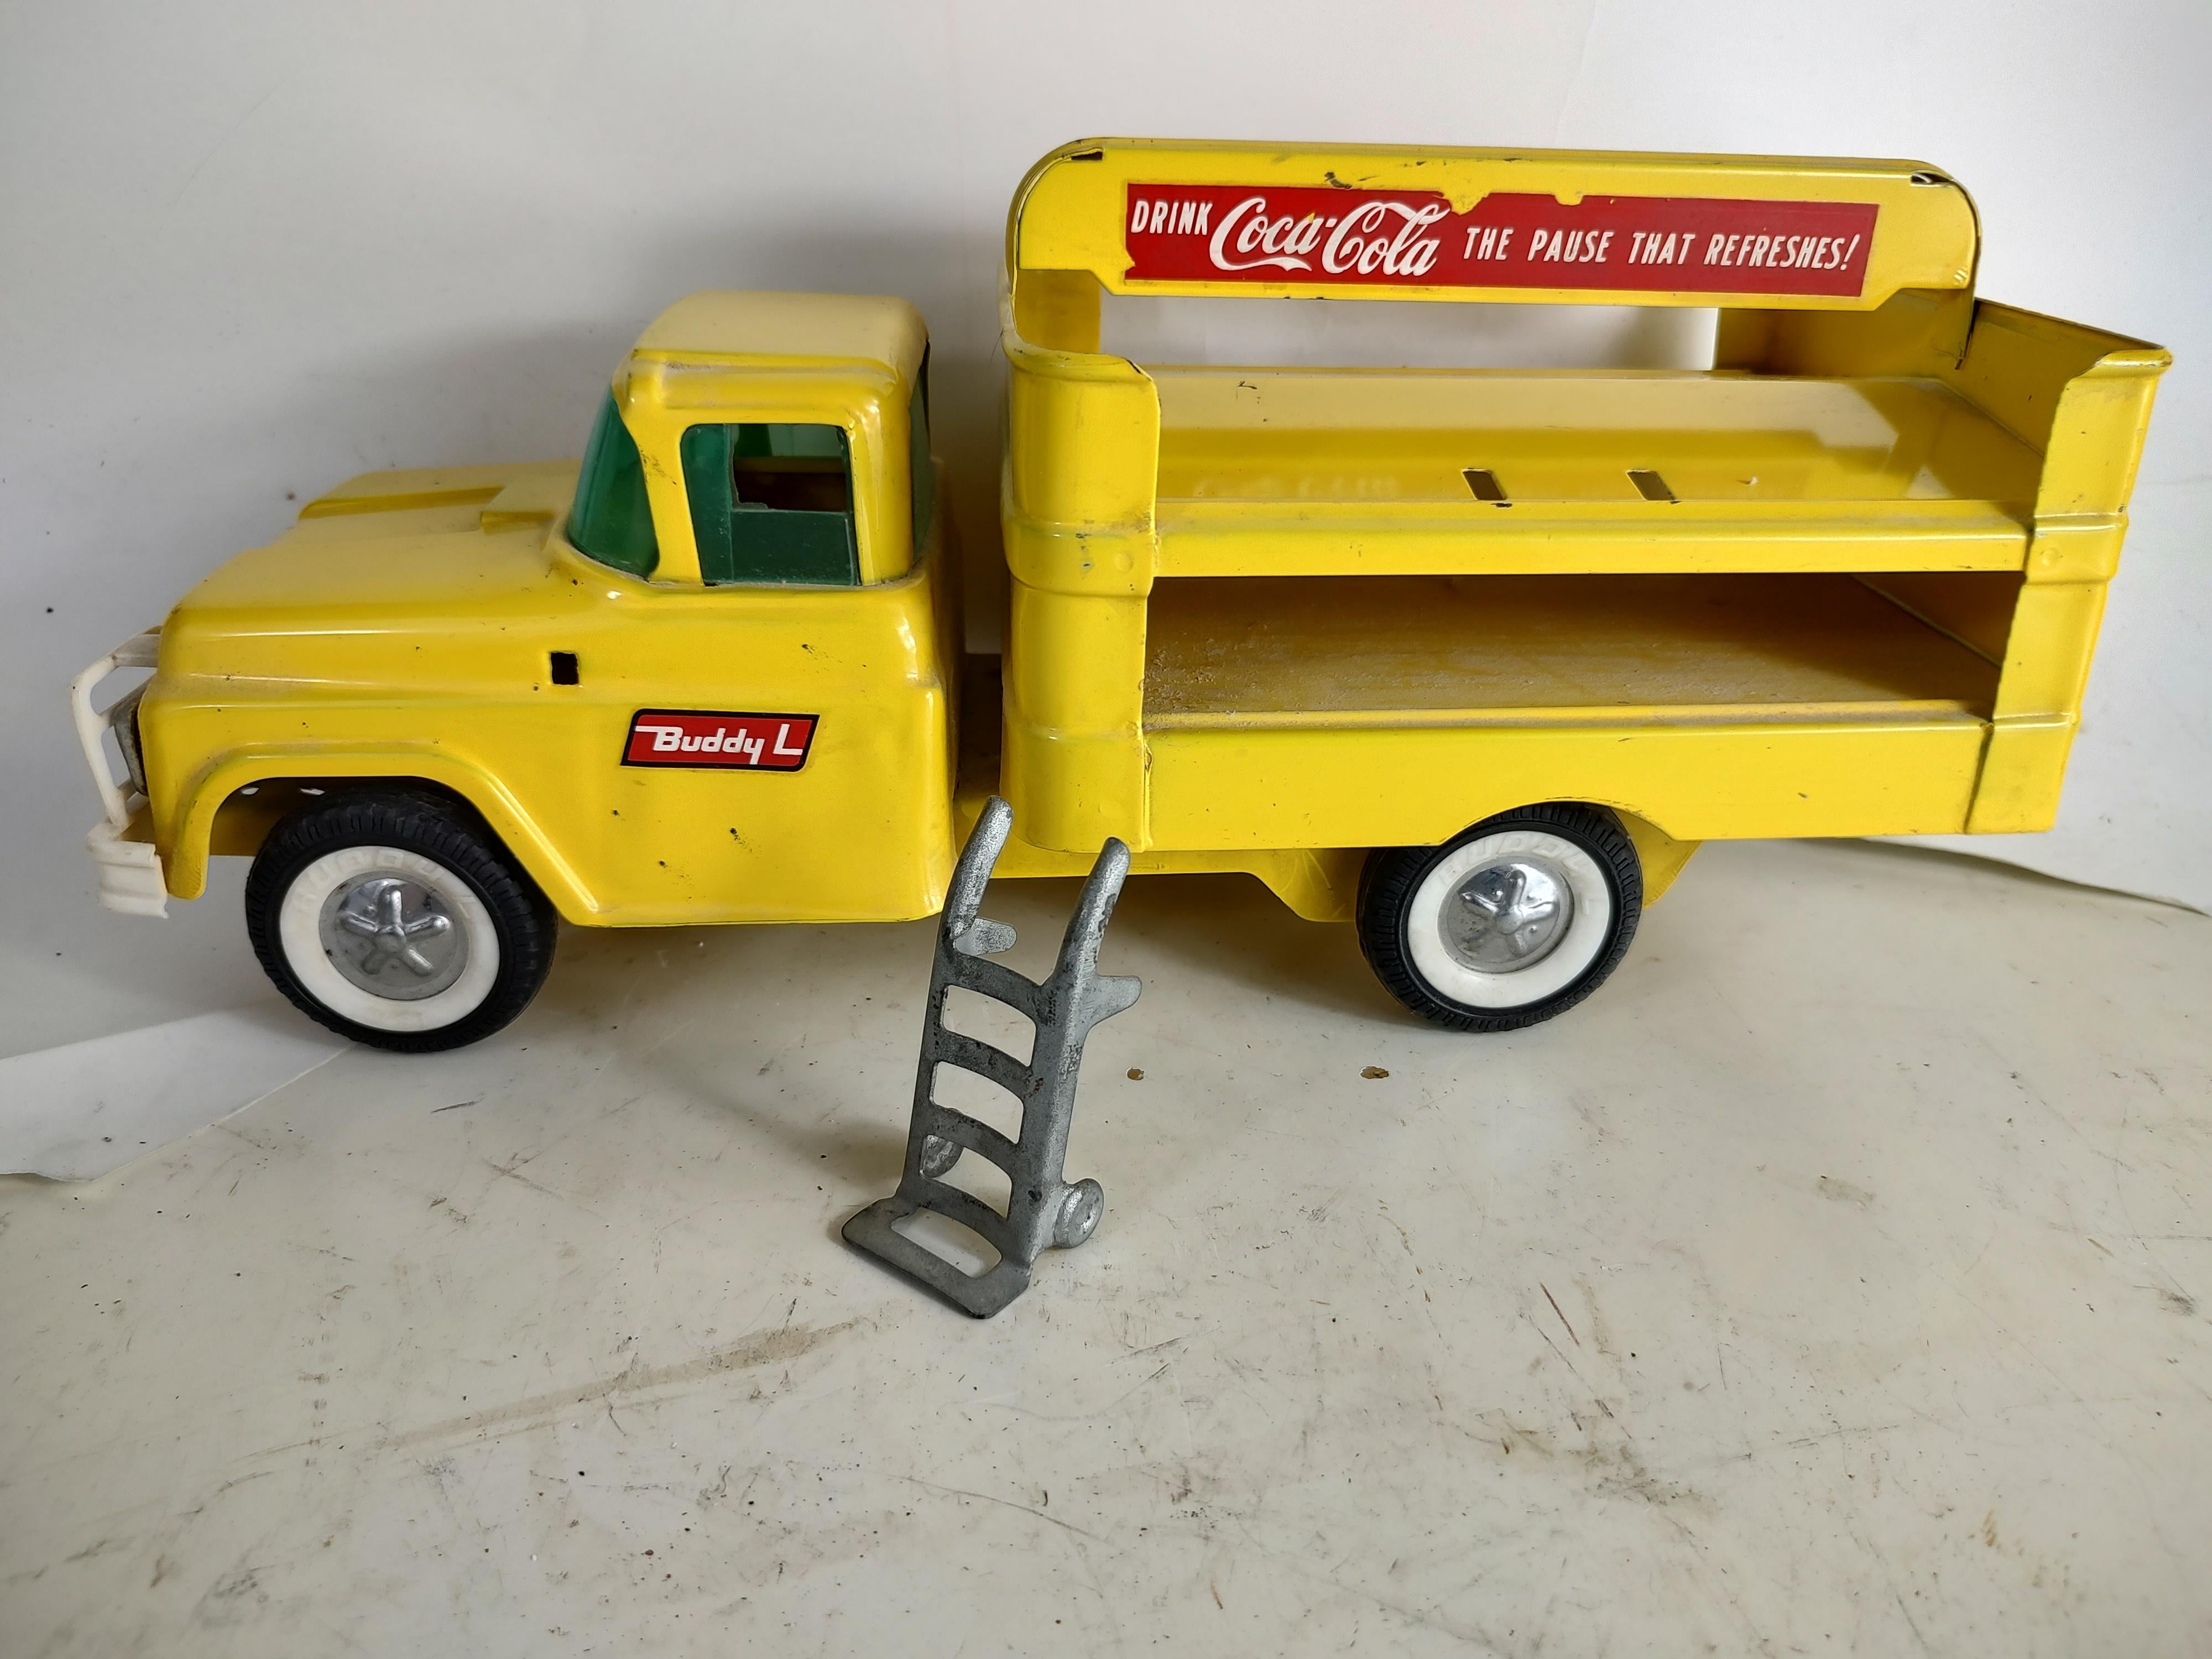 Mid Century Toy Coca Cola Delivery Truck by Buddy L 2